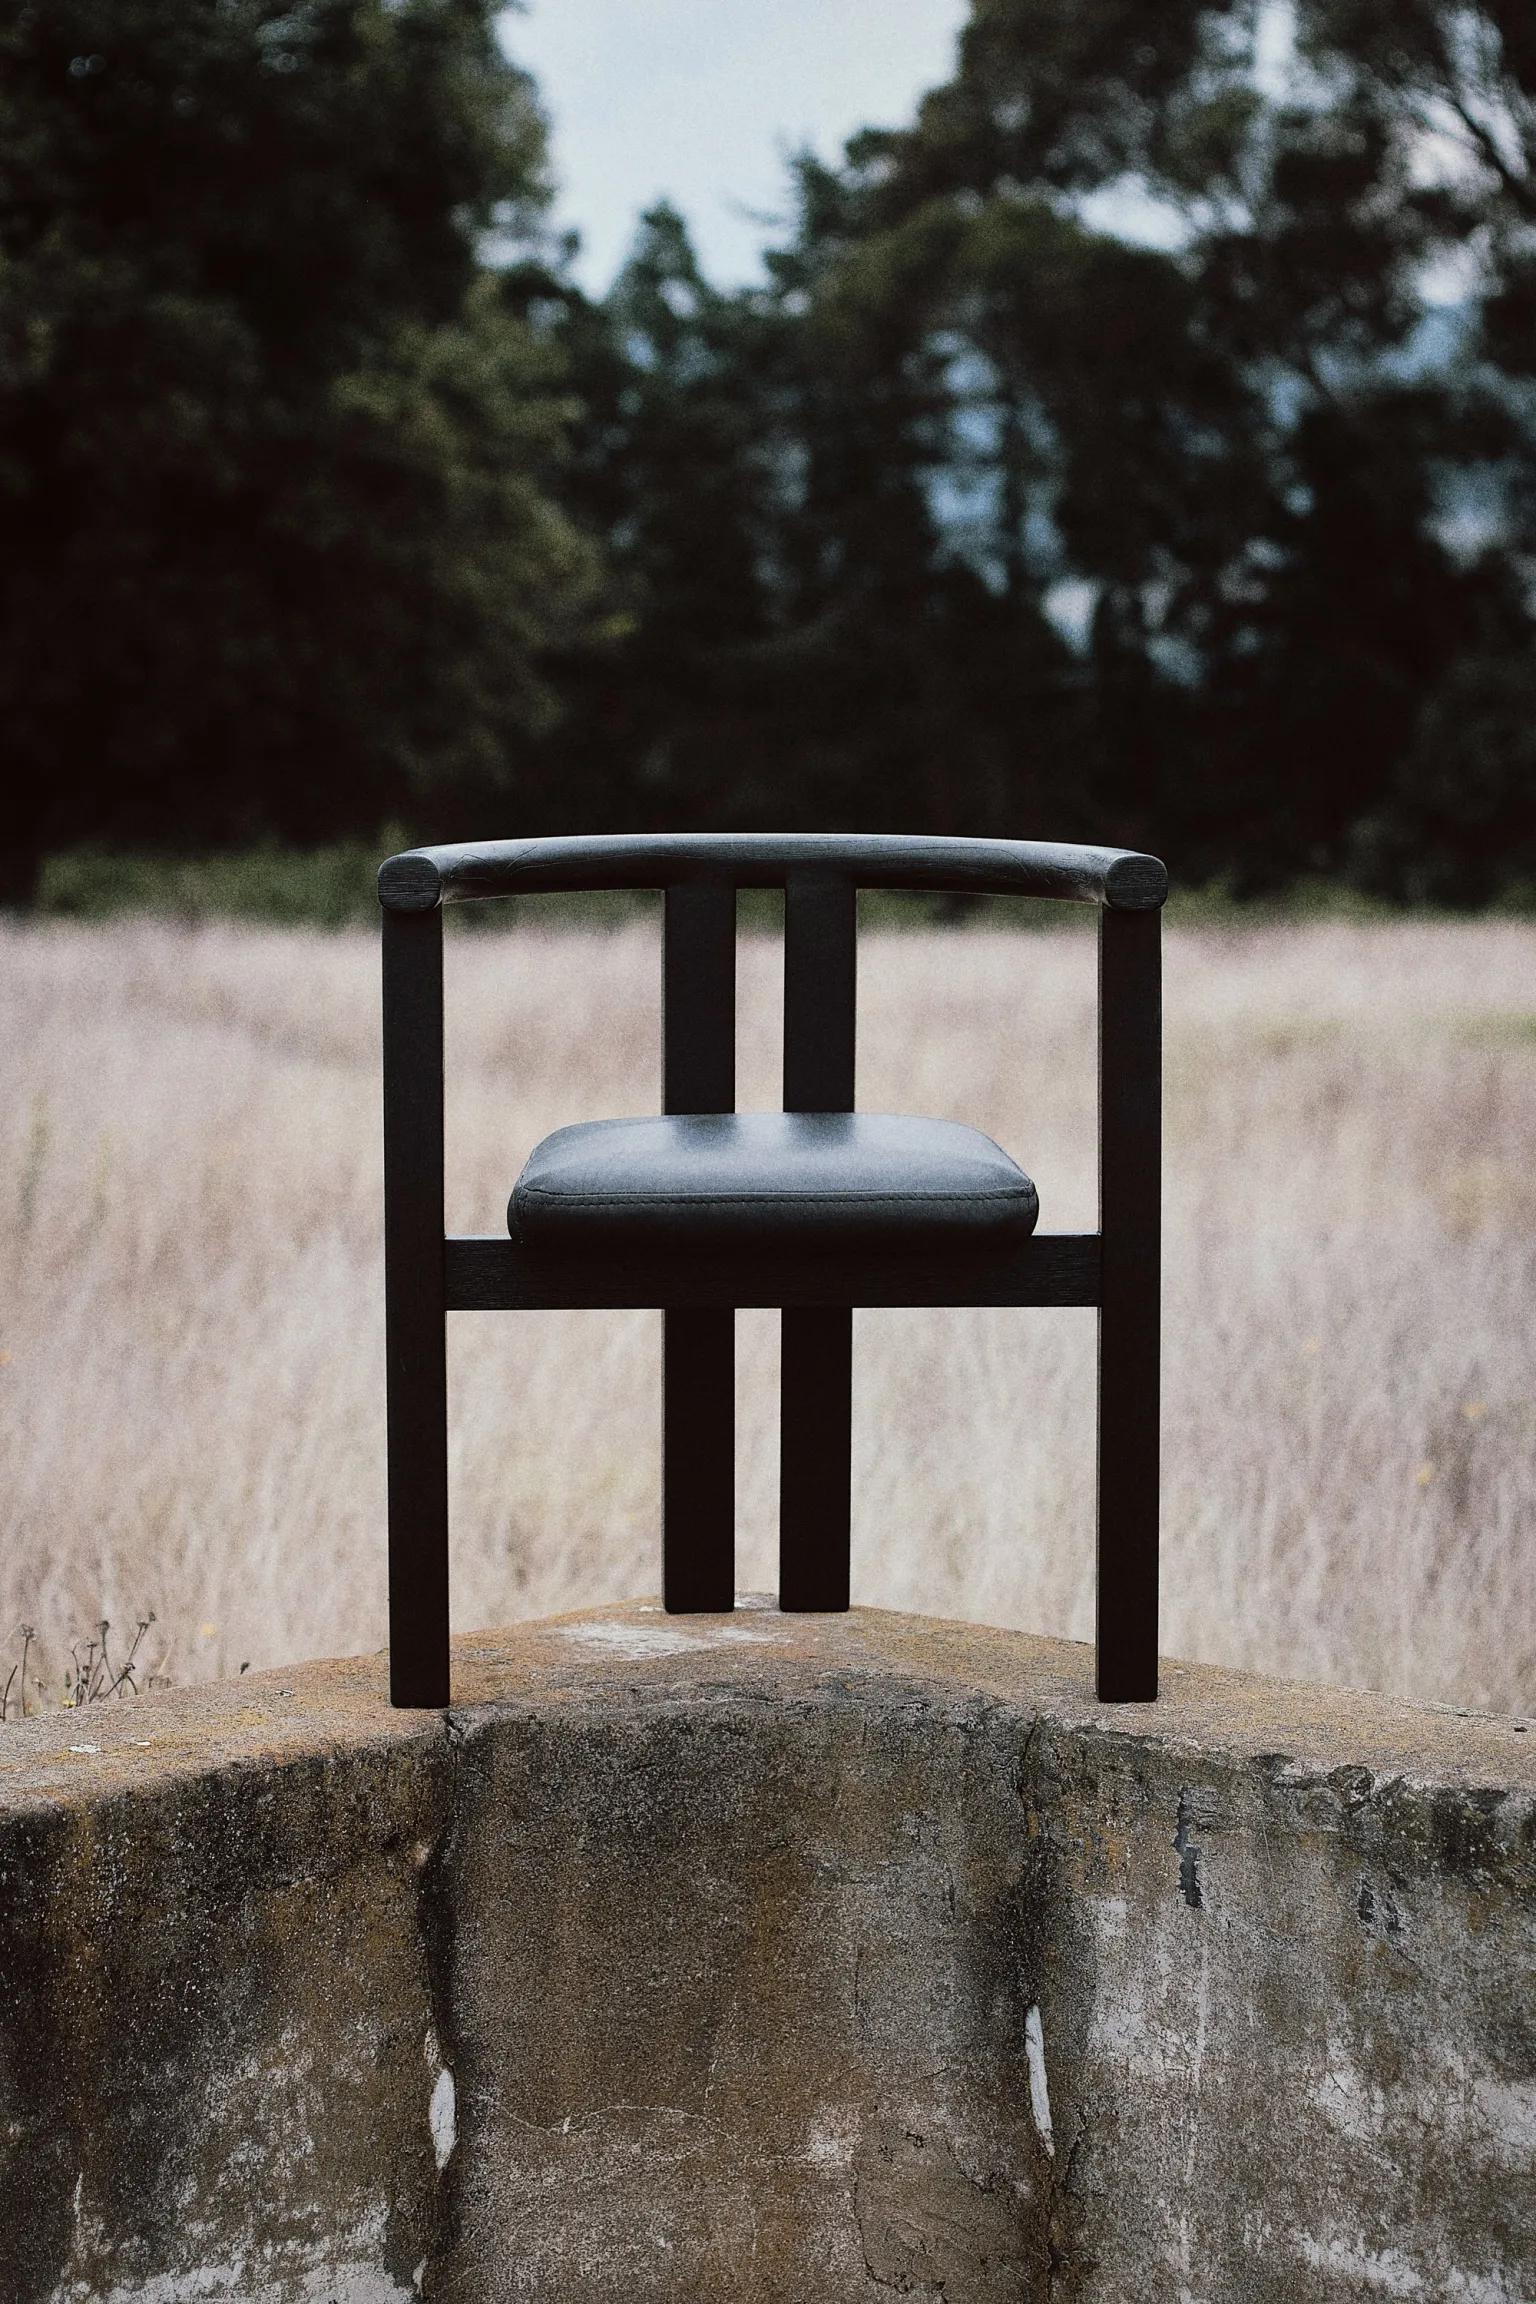 Dining chair Olta by Camilo Andres Rodriguez Marquez (aka CarmWorks)

Solid oak or cedar / Burnt wood or natural

Each piece is made to order and hand crafted by the artist.

--
Camilo Andres Rodriguez Marquez is a Colombian born designer